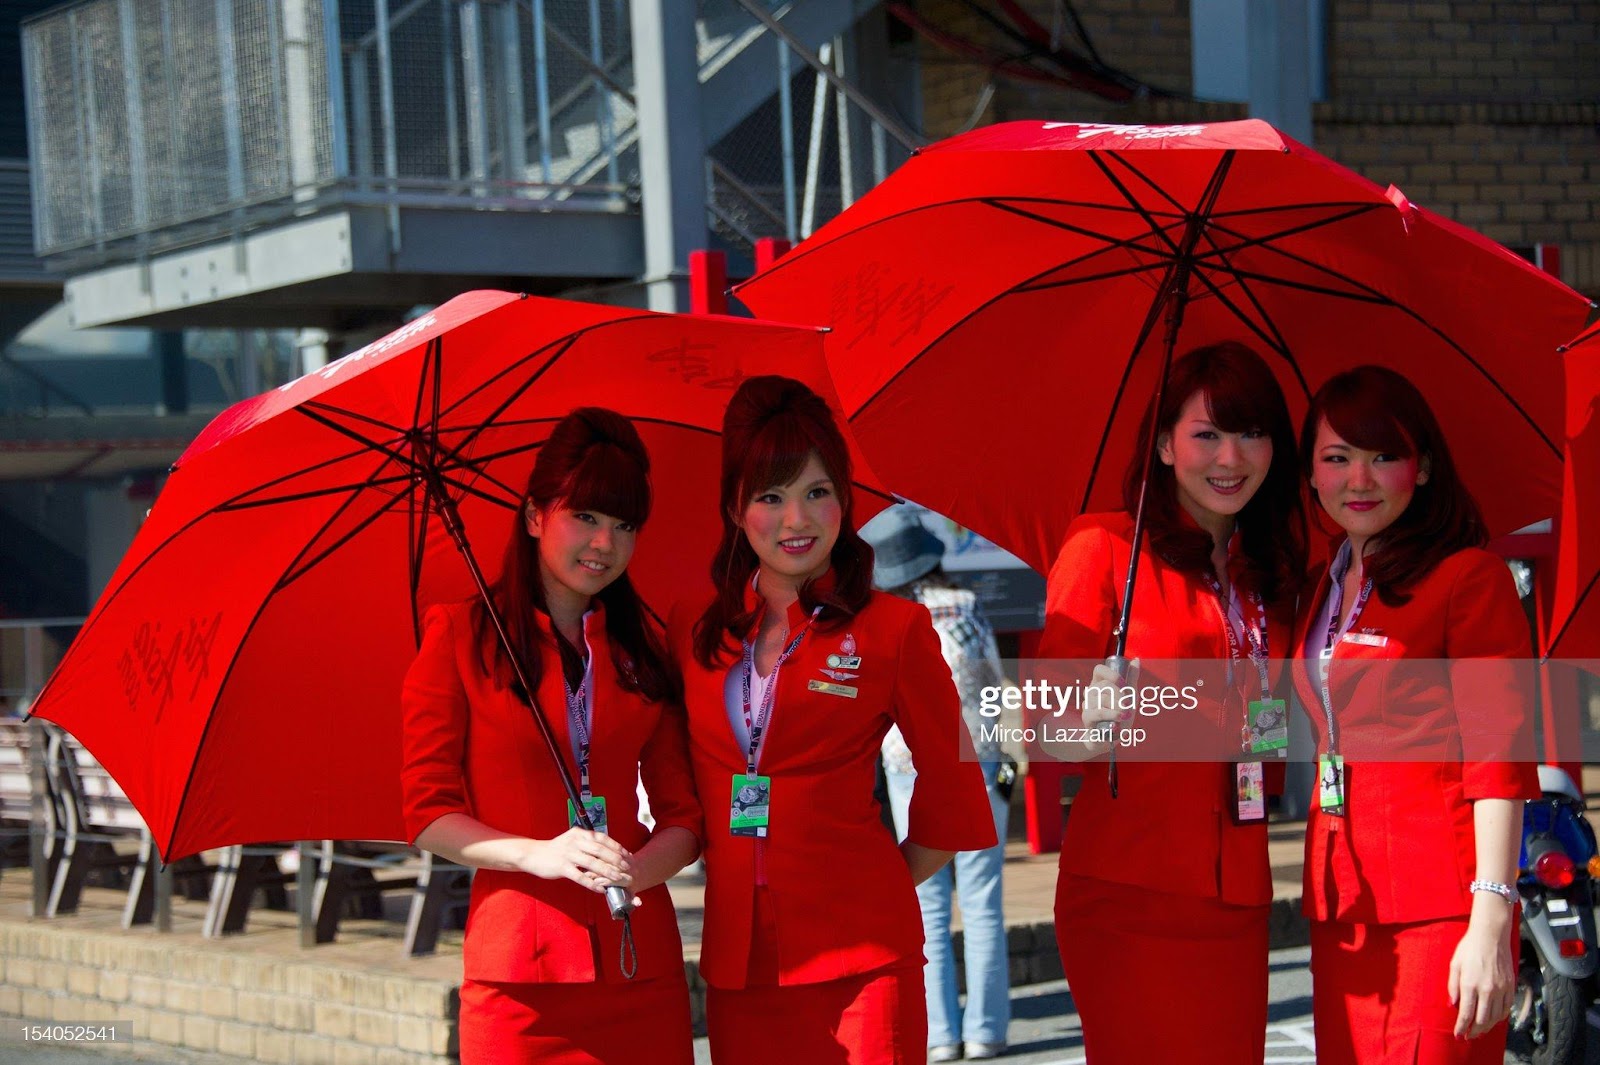 D:\Documenti\posts\posts\Women and motorsport\foto\Getty e altre\the-grid-girls-pose-in-paddock-during-the-qualifying-practice-of-the-picture-id154052541.jpg